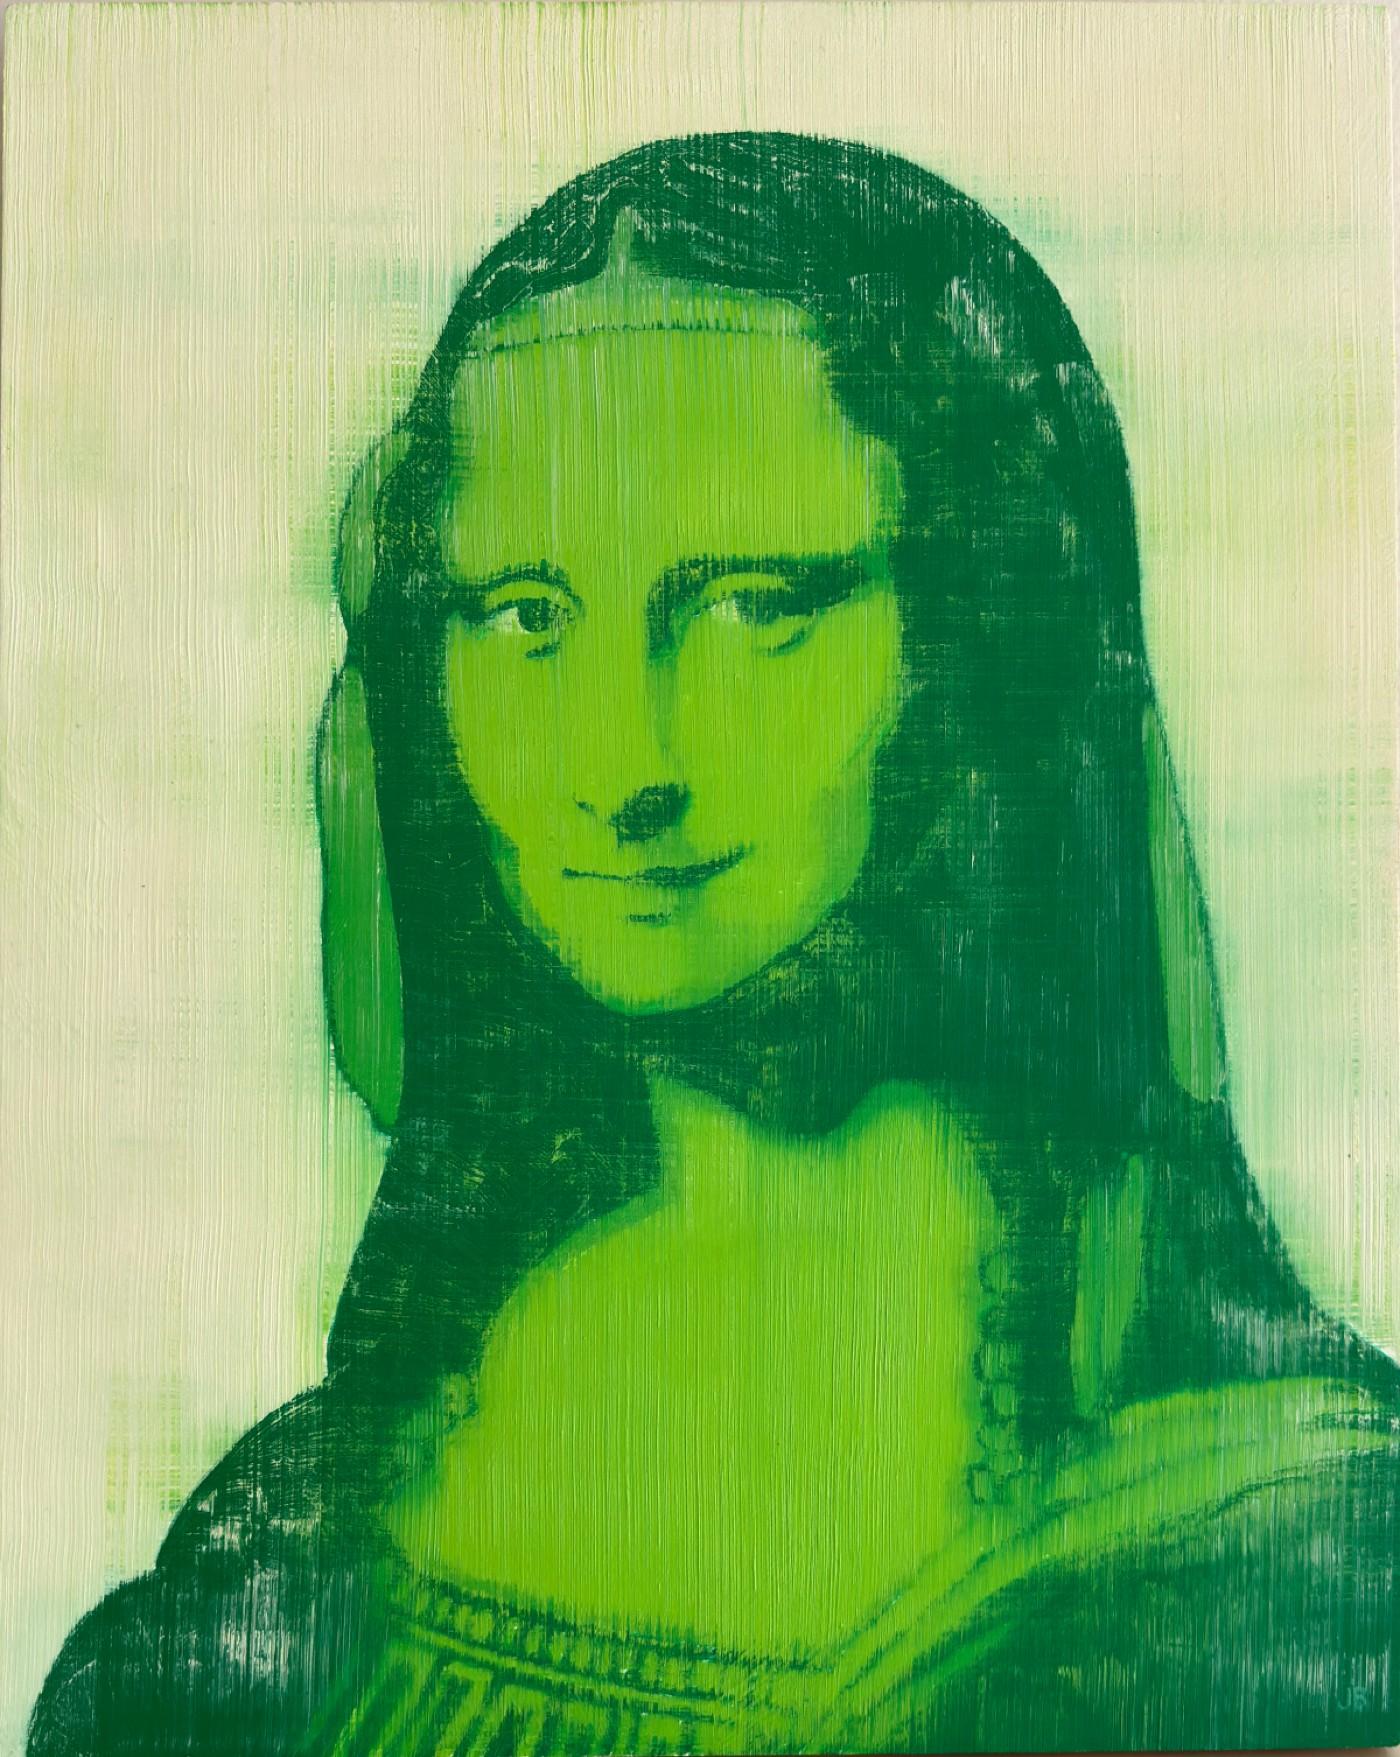 Joan Breckwoldt Portrait Painting - Mona Lisa Green 20" x 16 " Oil on Birch Panel Unique Iconic Style Contemporary